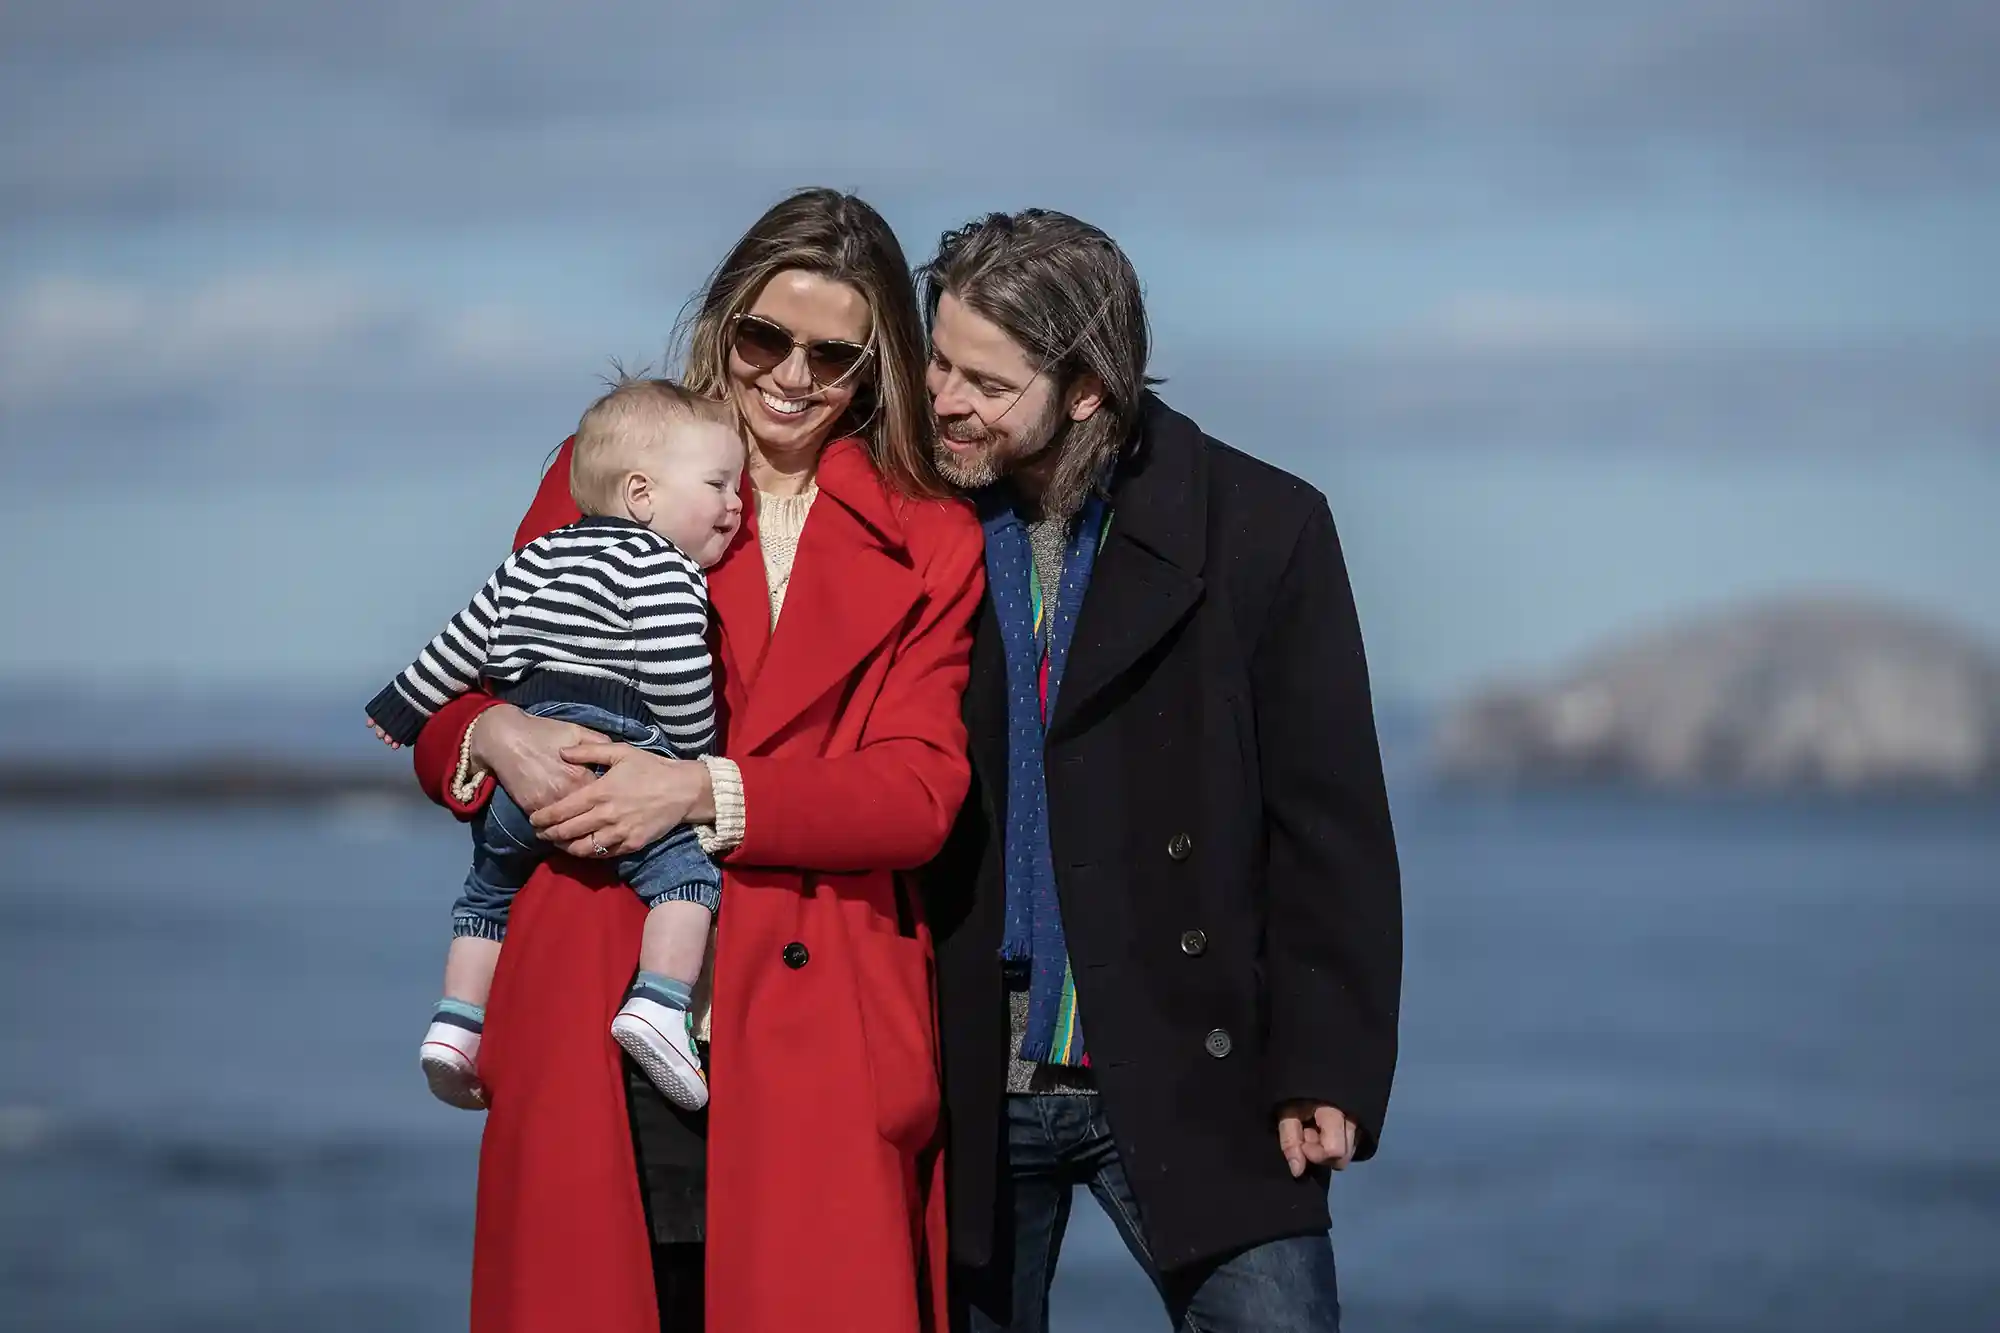 A woman in a red coat holds a baby next to a man in a black coat, all standing by a body of water with distant hills in the background.